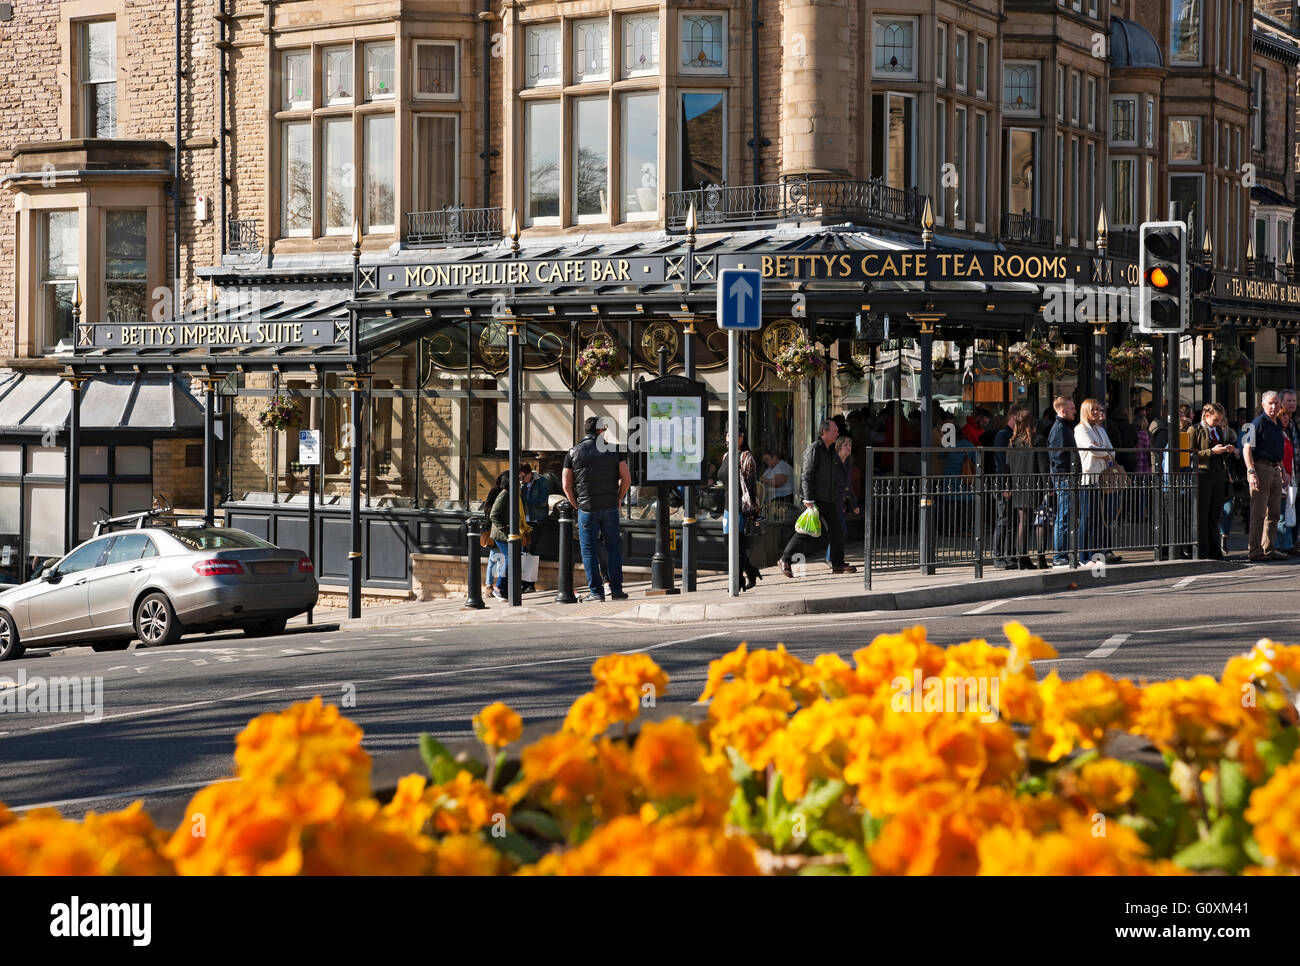 People outside Bettys cafe and tea rooms shop store in spring Harrogate North Yorkshire England UK United Kingdom GB Great Britain Stock Photo